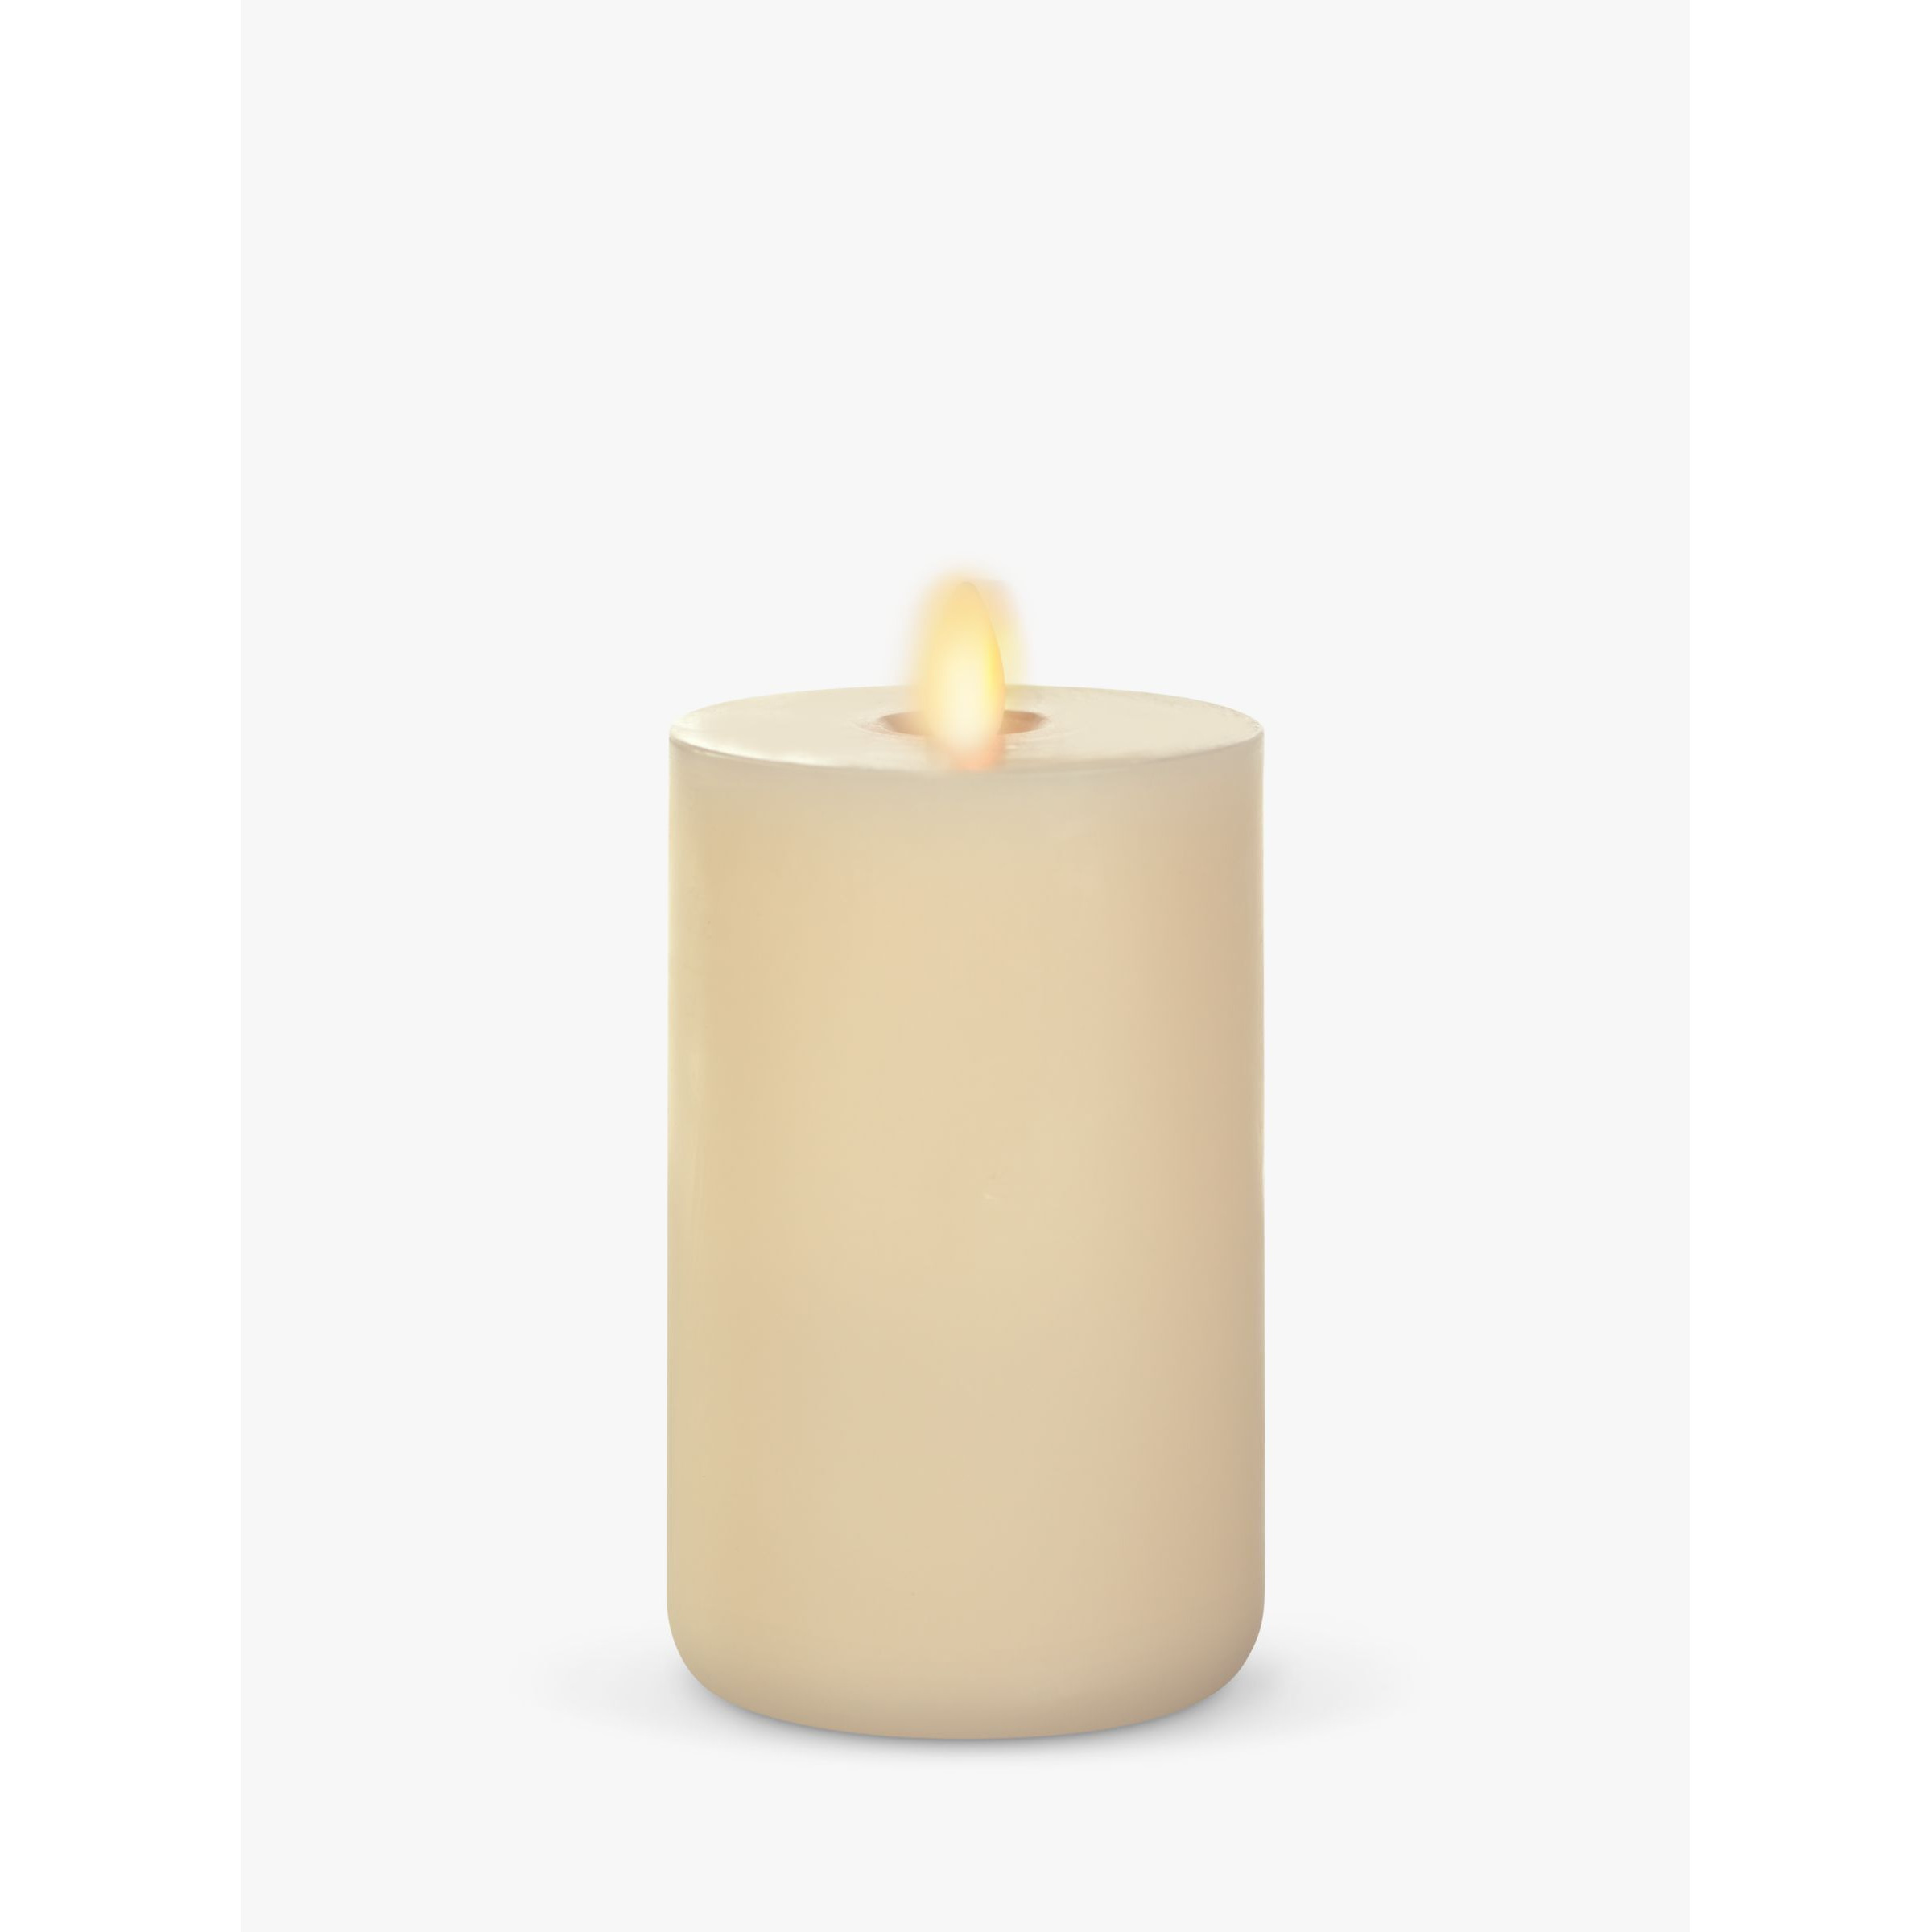 LightLi Moving Flame LED Light Touch Candle, 15 cm - image 1